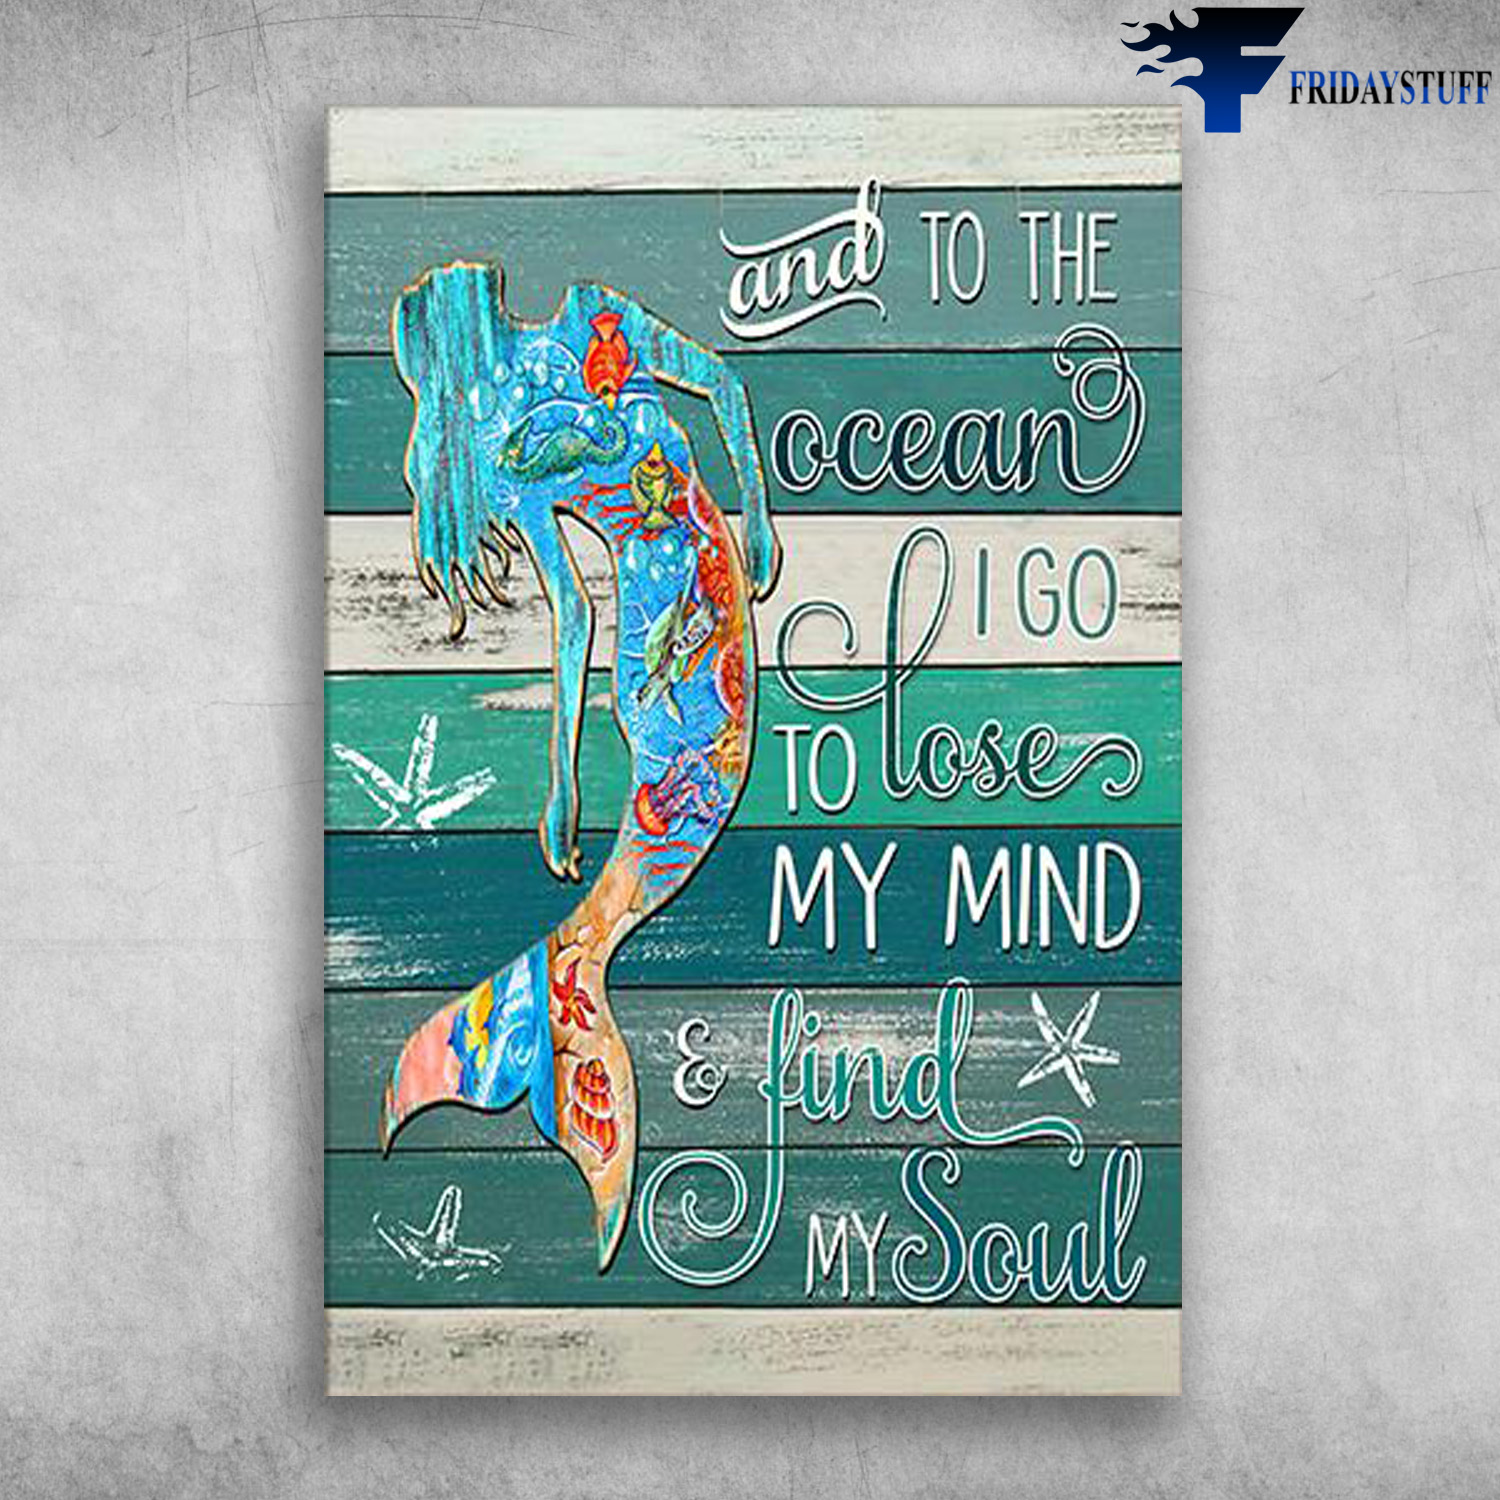 The Mermaid – And To The Ocean, I Go To Close My Mind And Find My Soul